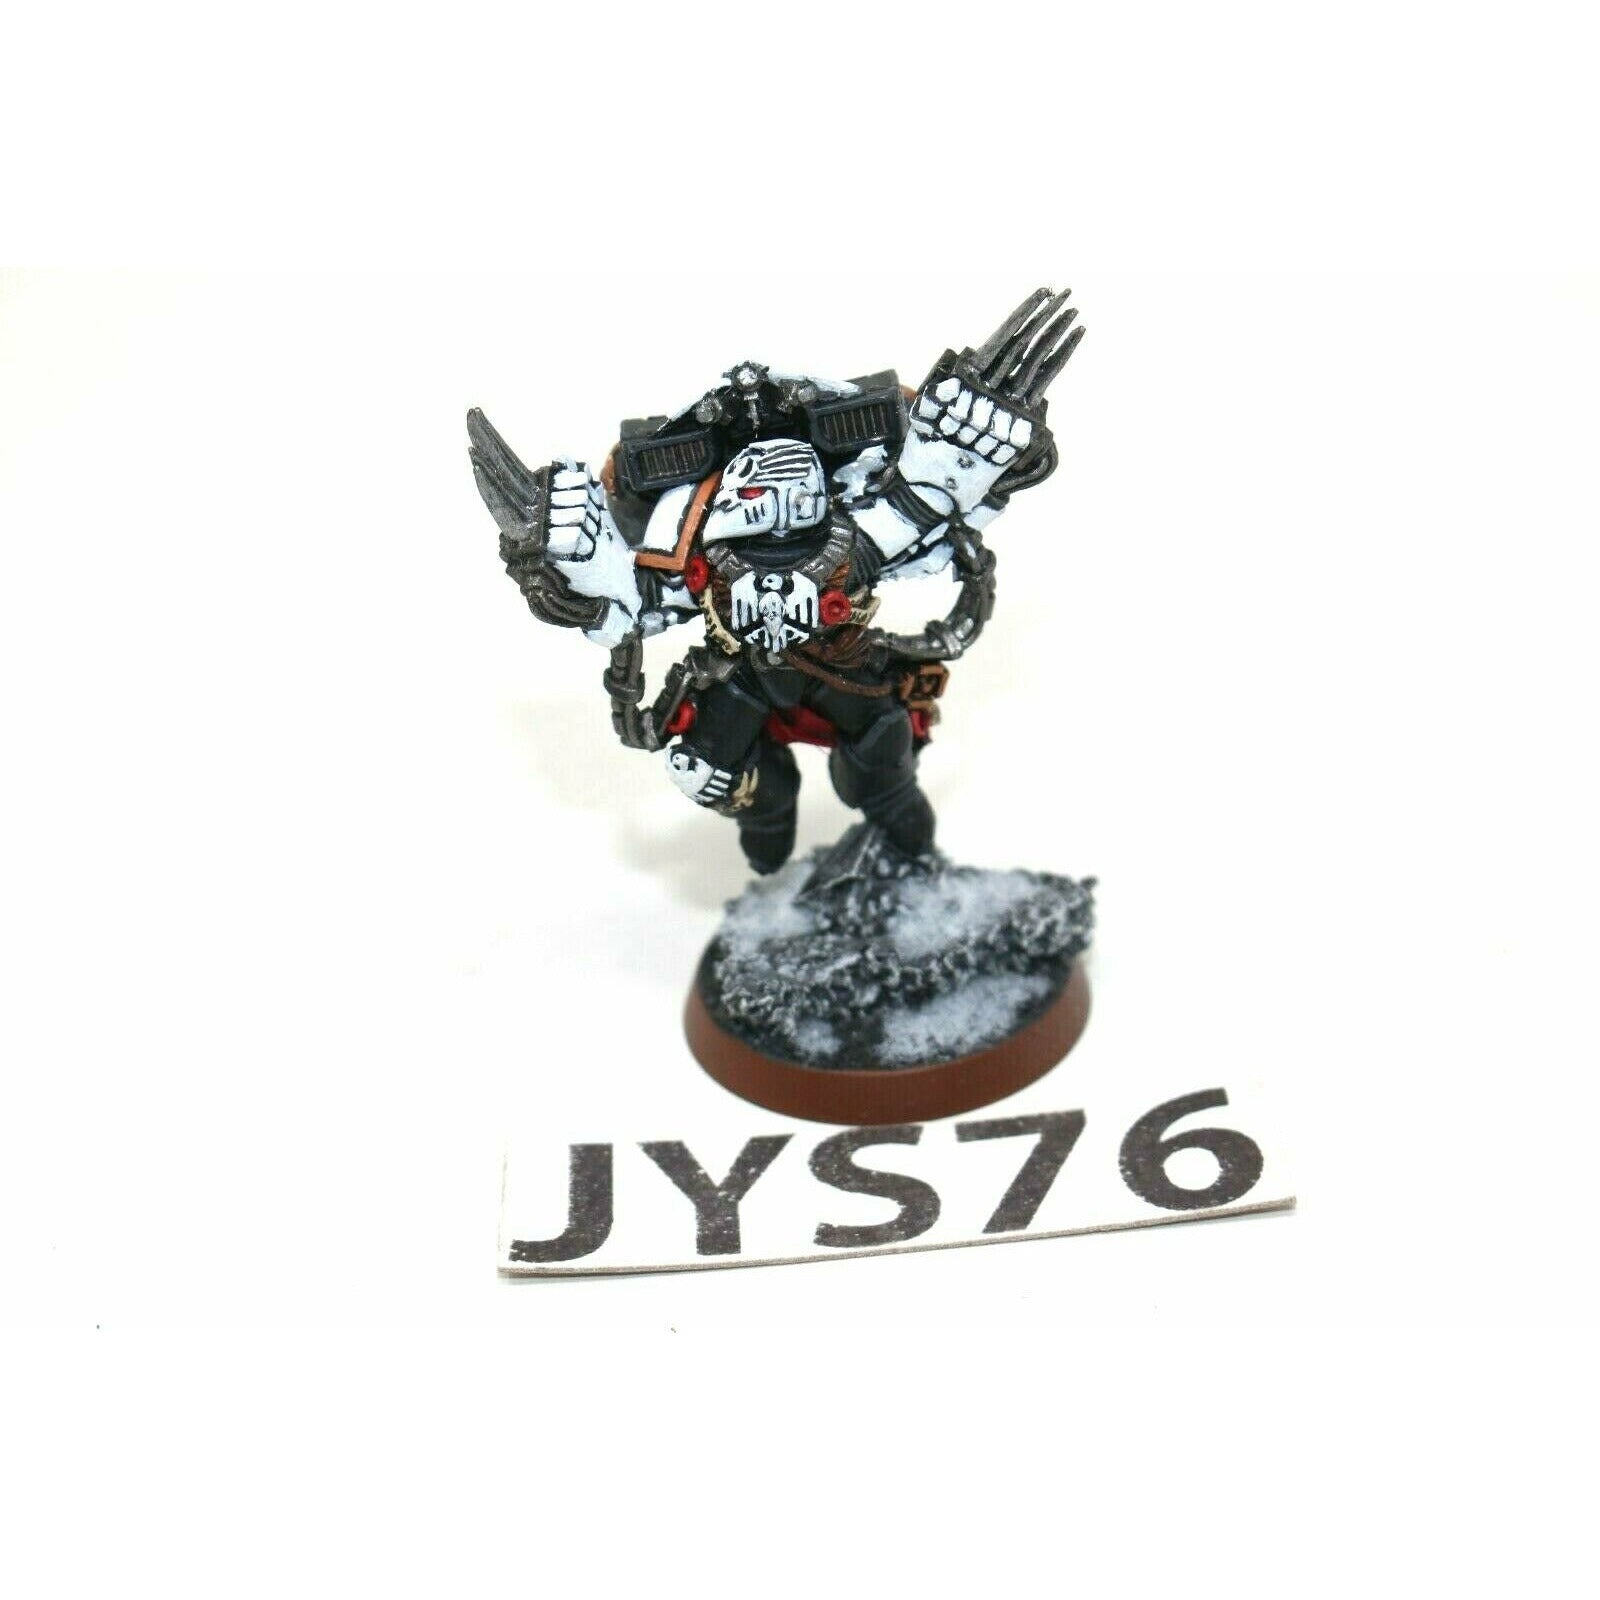 Kayvaan Shrike Primaris Raven Guard Painted Miniature for Sale, Custom  Painted Warhammer 40k and Age of Sigmar Models Available 